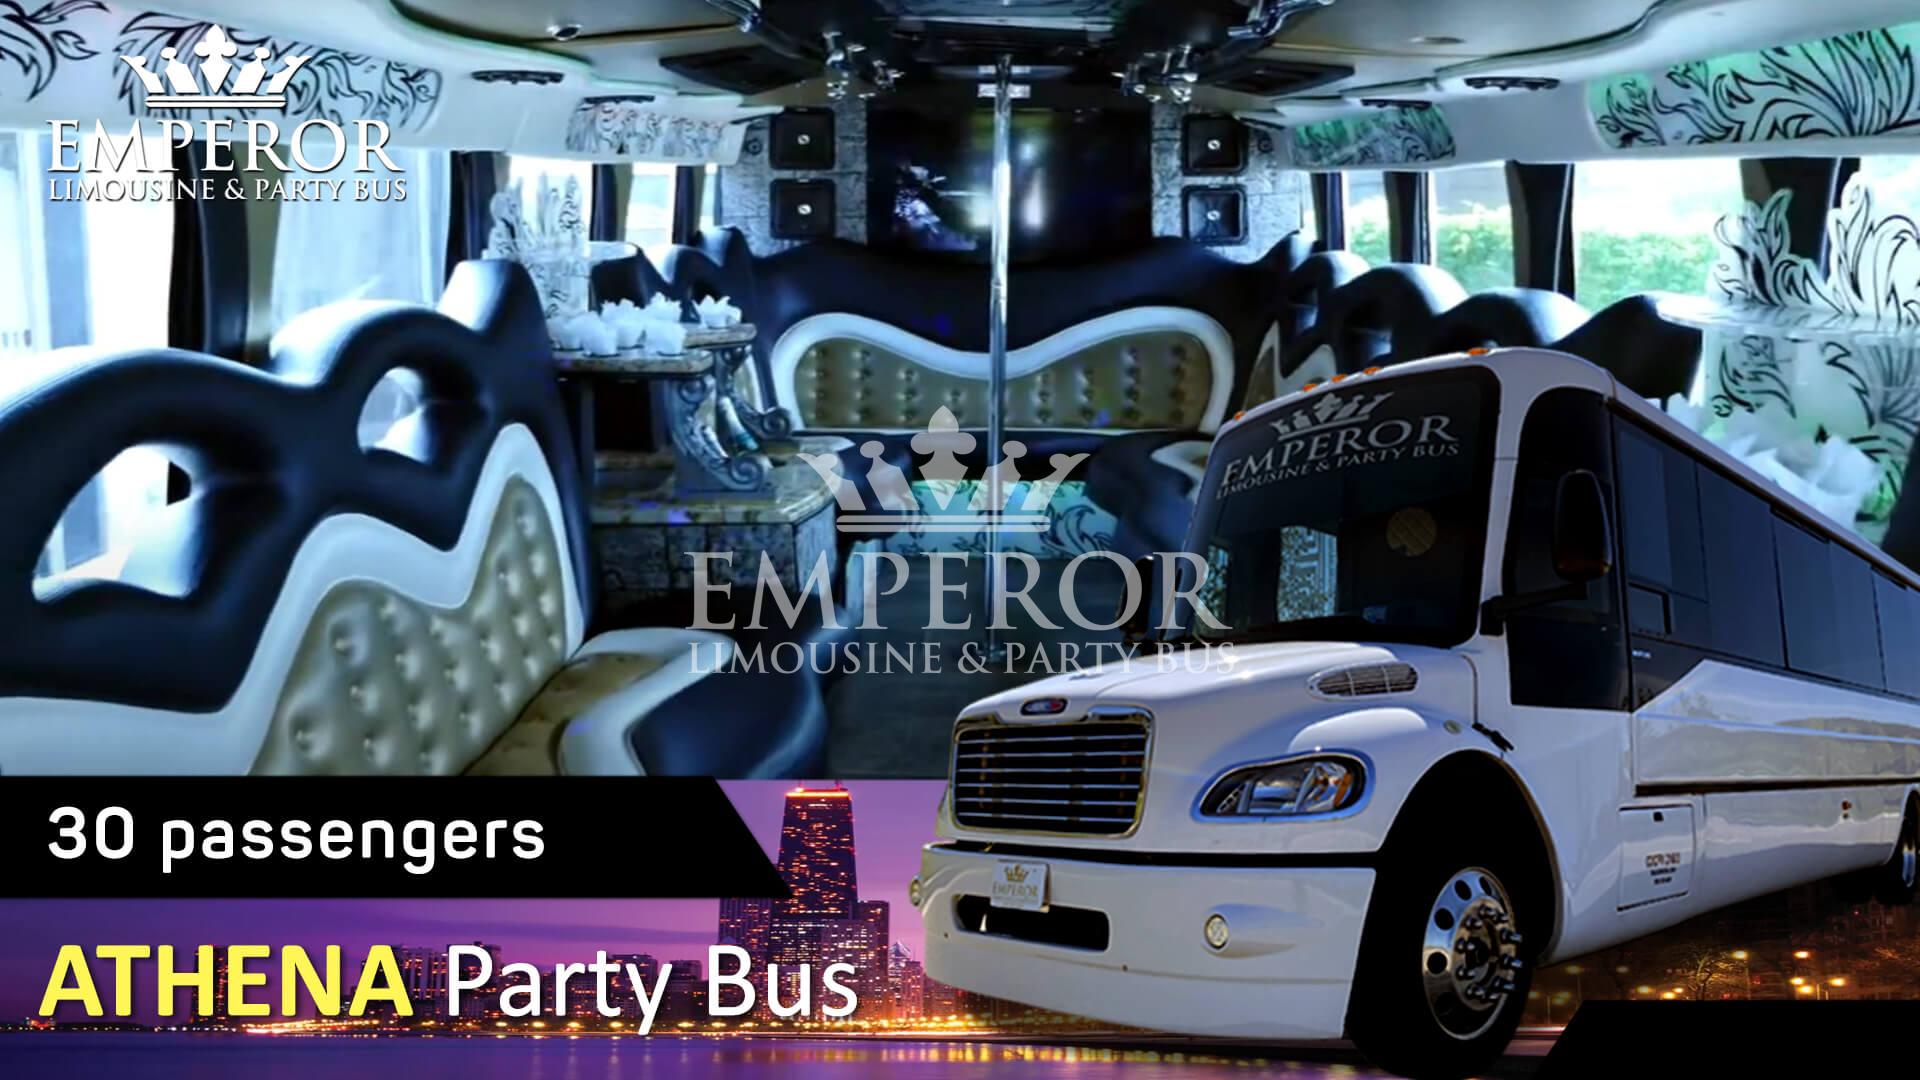 Party bus rental service in Antioch - Athena Edition